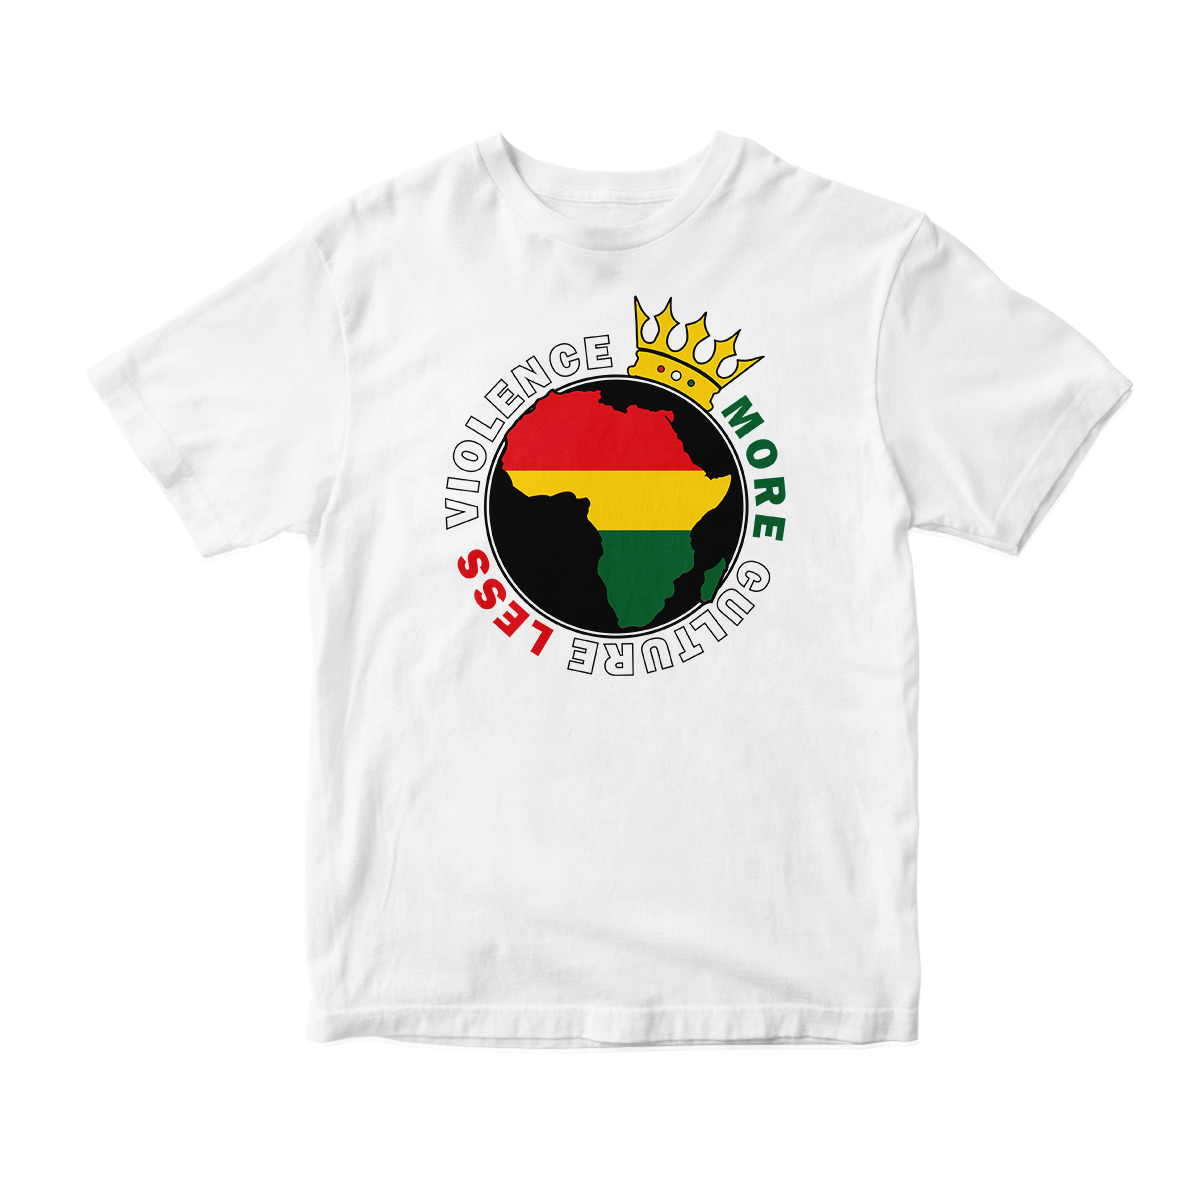 'More Culture' Short Sleeve Tee